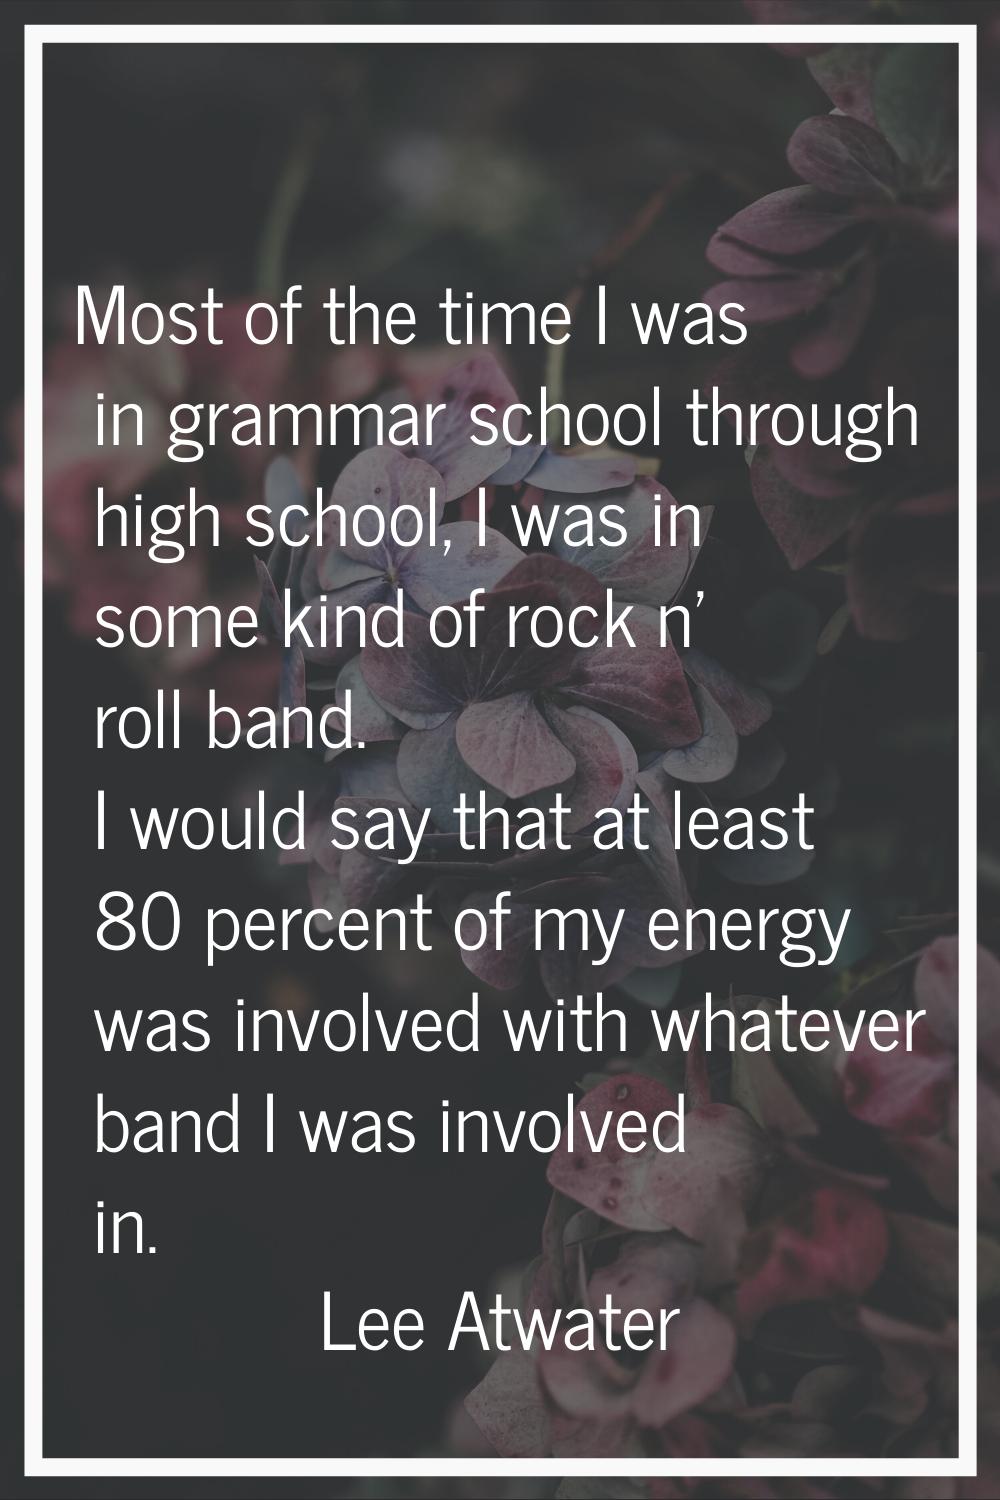 Most of the time I was in grammar school through high school, I was in some kind of rock n' roll ba